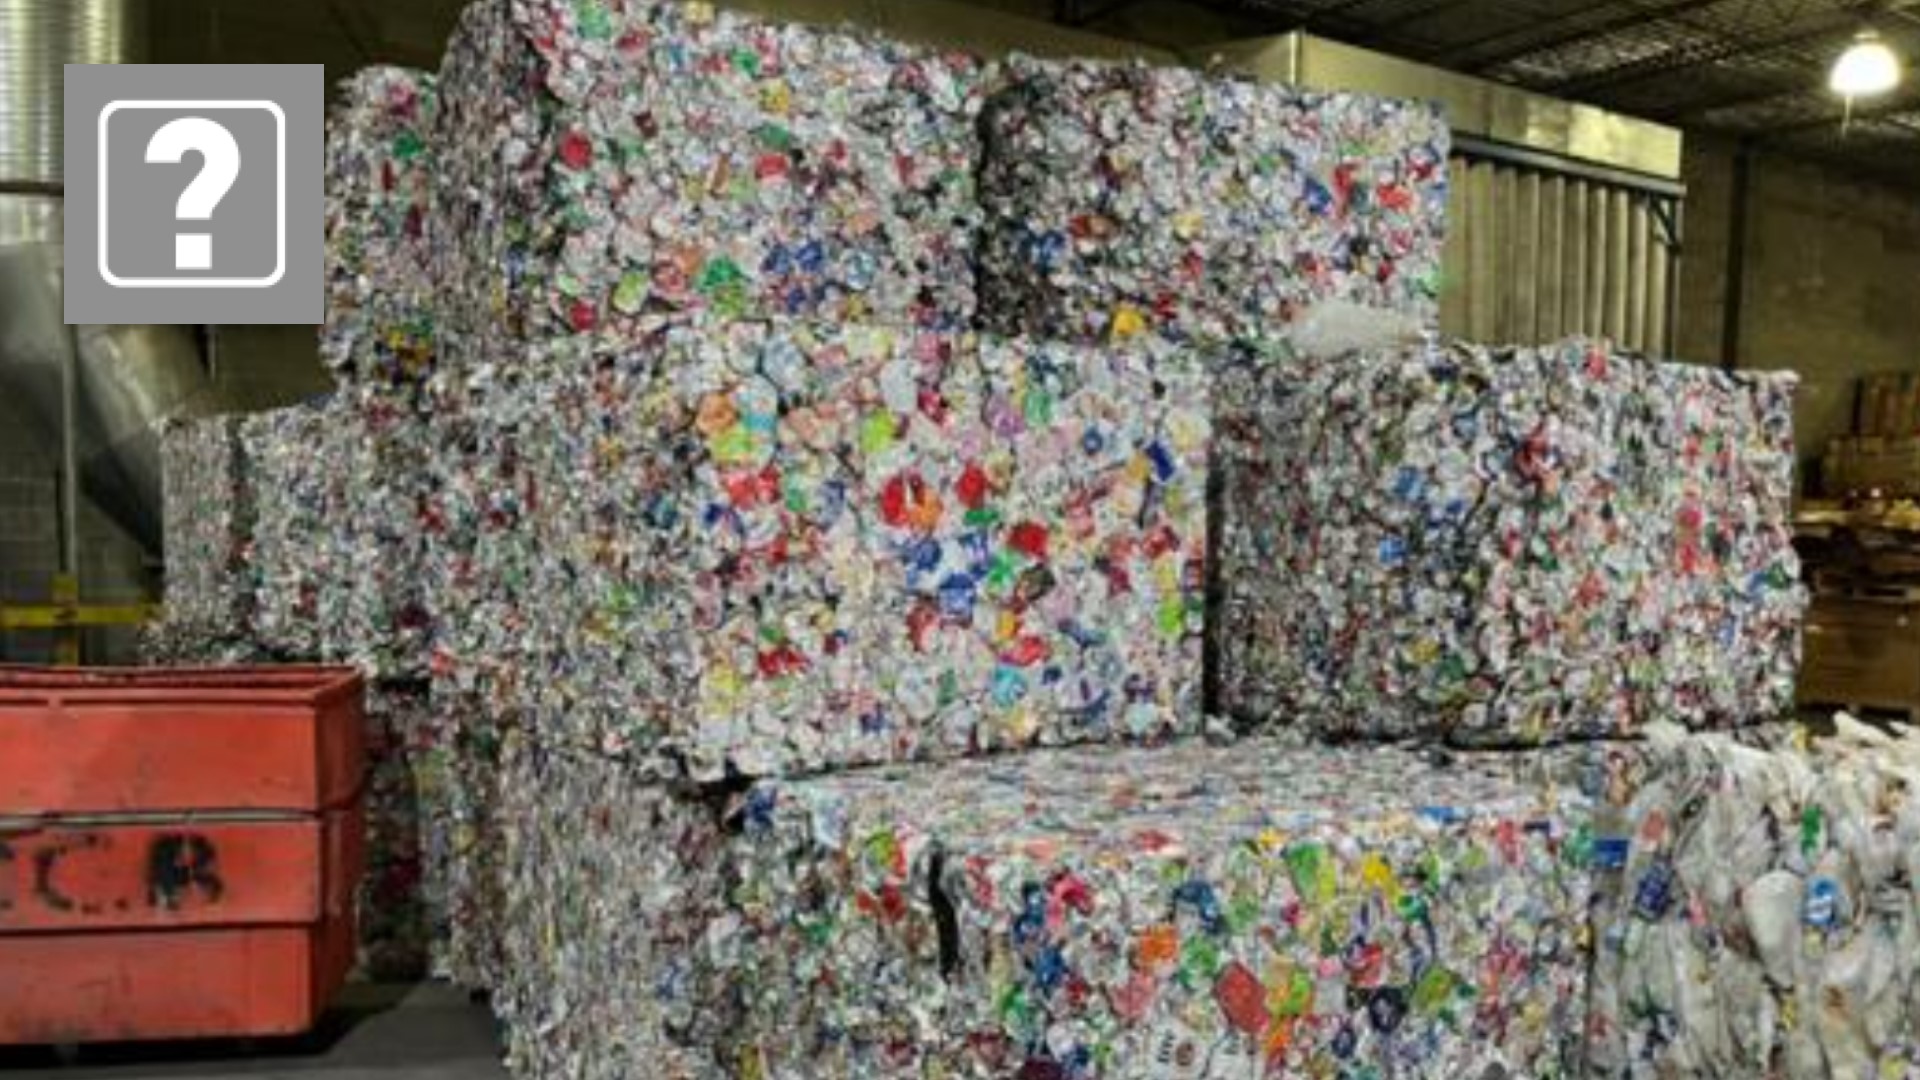 Recycling hasn't had the best track record in the St. Louis area recently. The city has since stopped taking recycling to landfills.